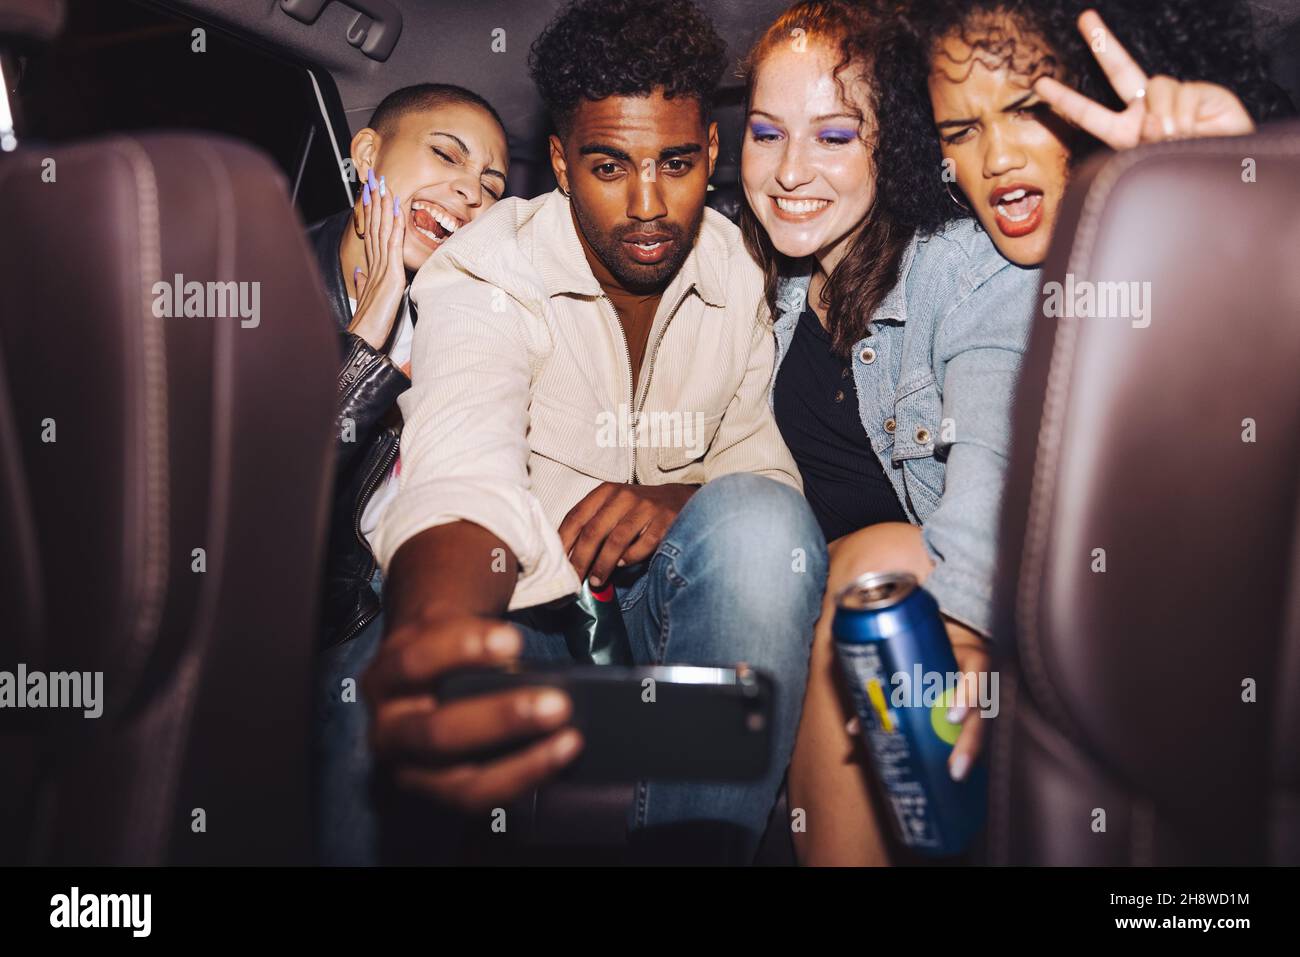 Diverse group of friends taking a selfie together inside a car. Group of young friends posing for a group photo in front of a camera phone. Carefree f Stock Photo